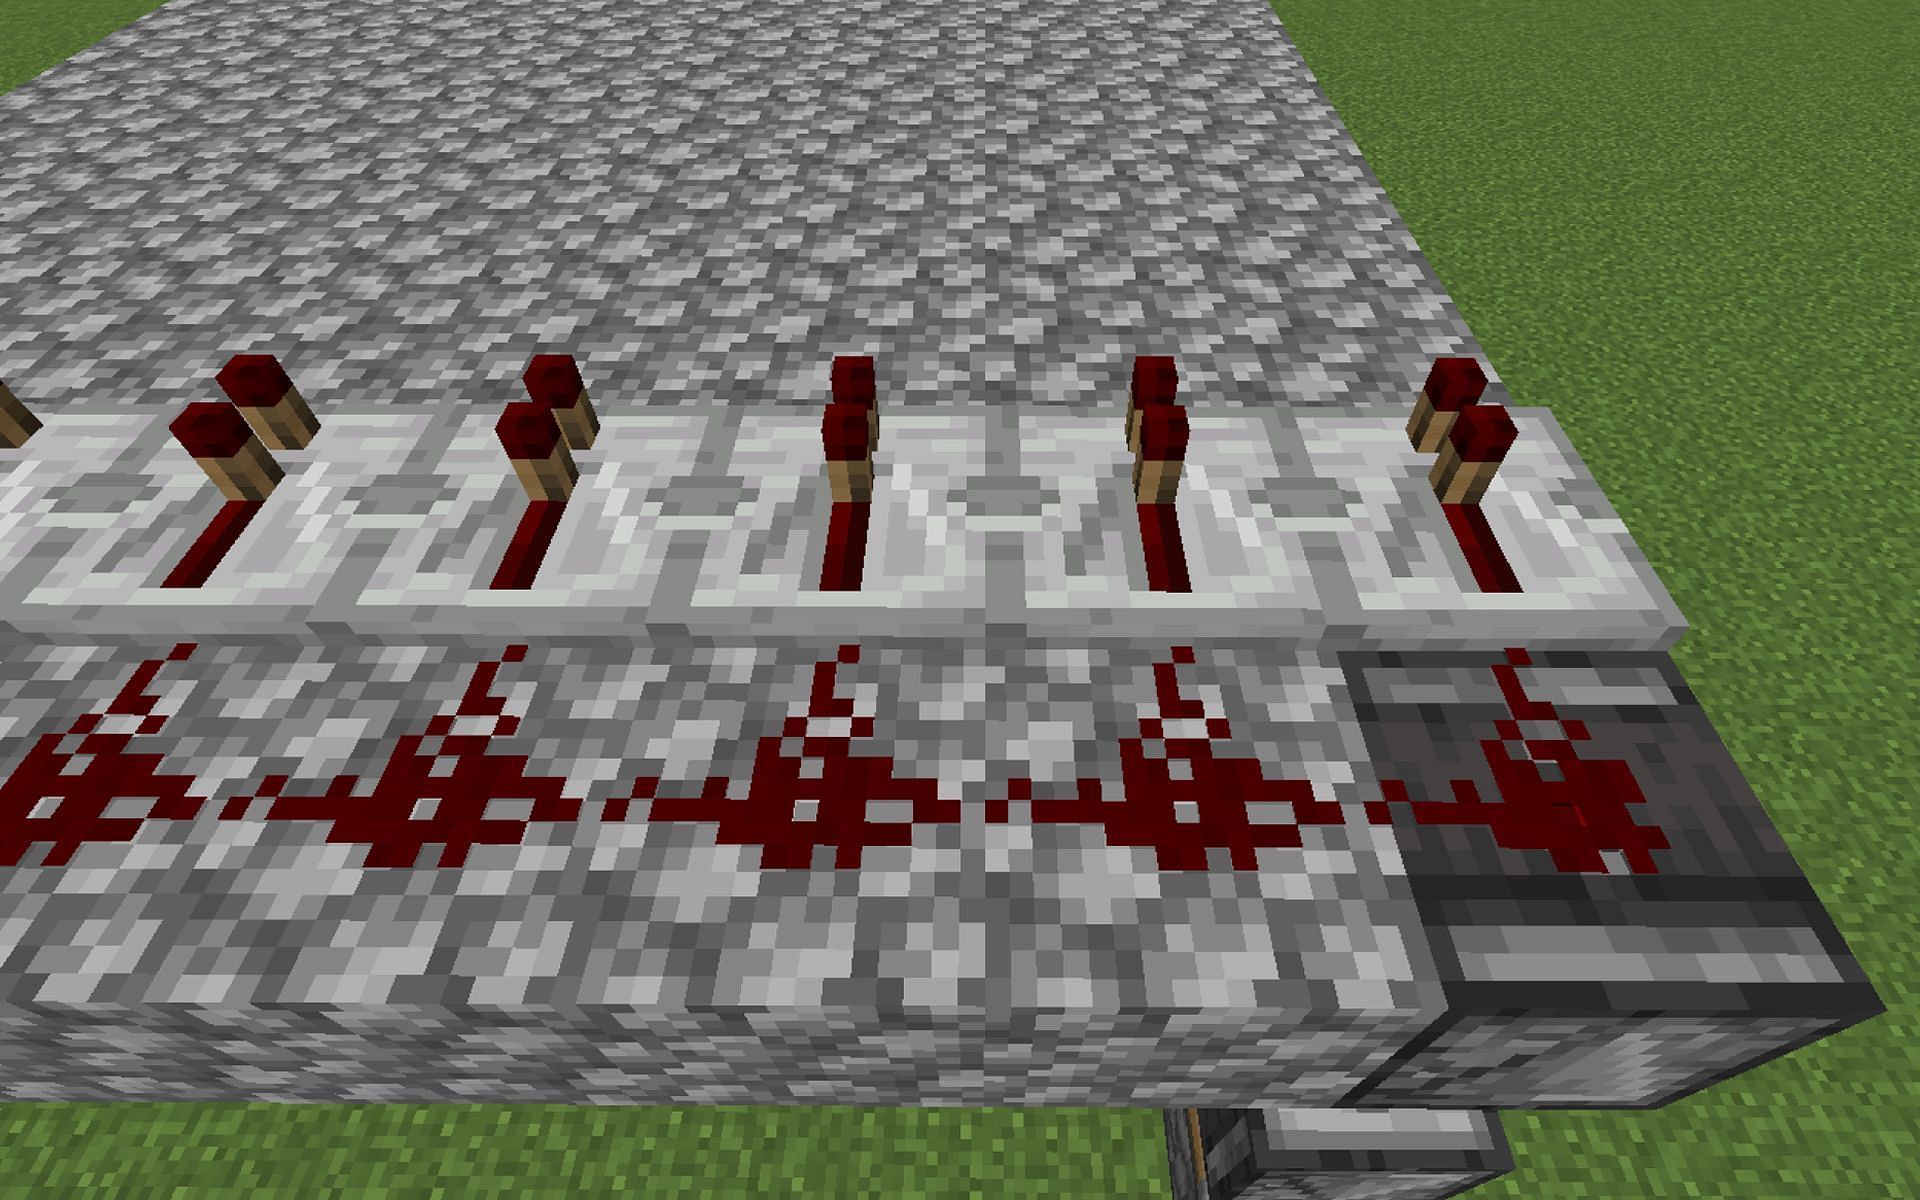 Redstone is a key component of many lag machines. Image via Minecraft.